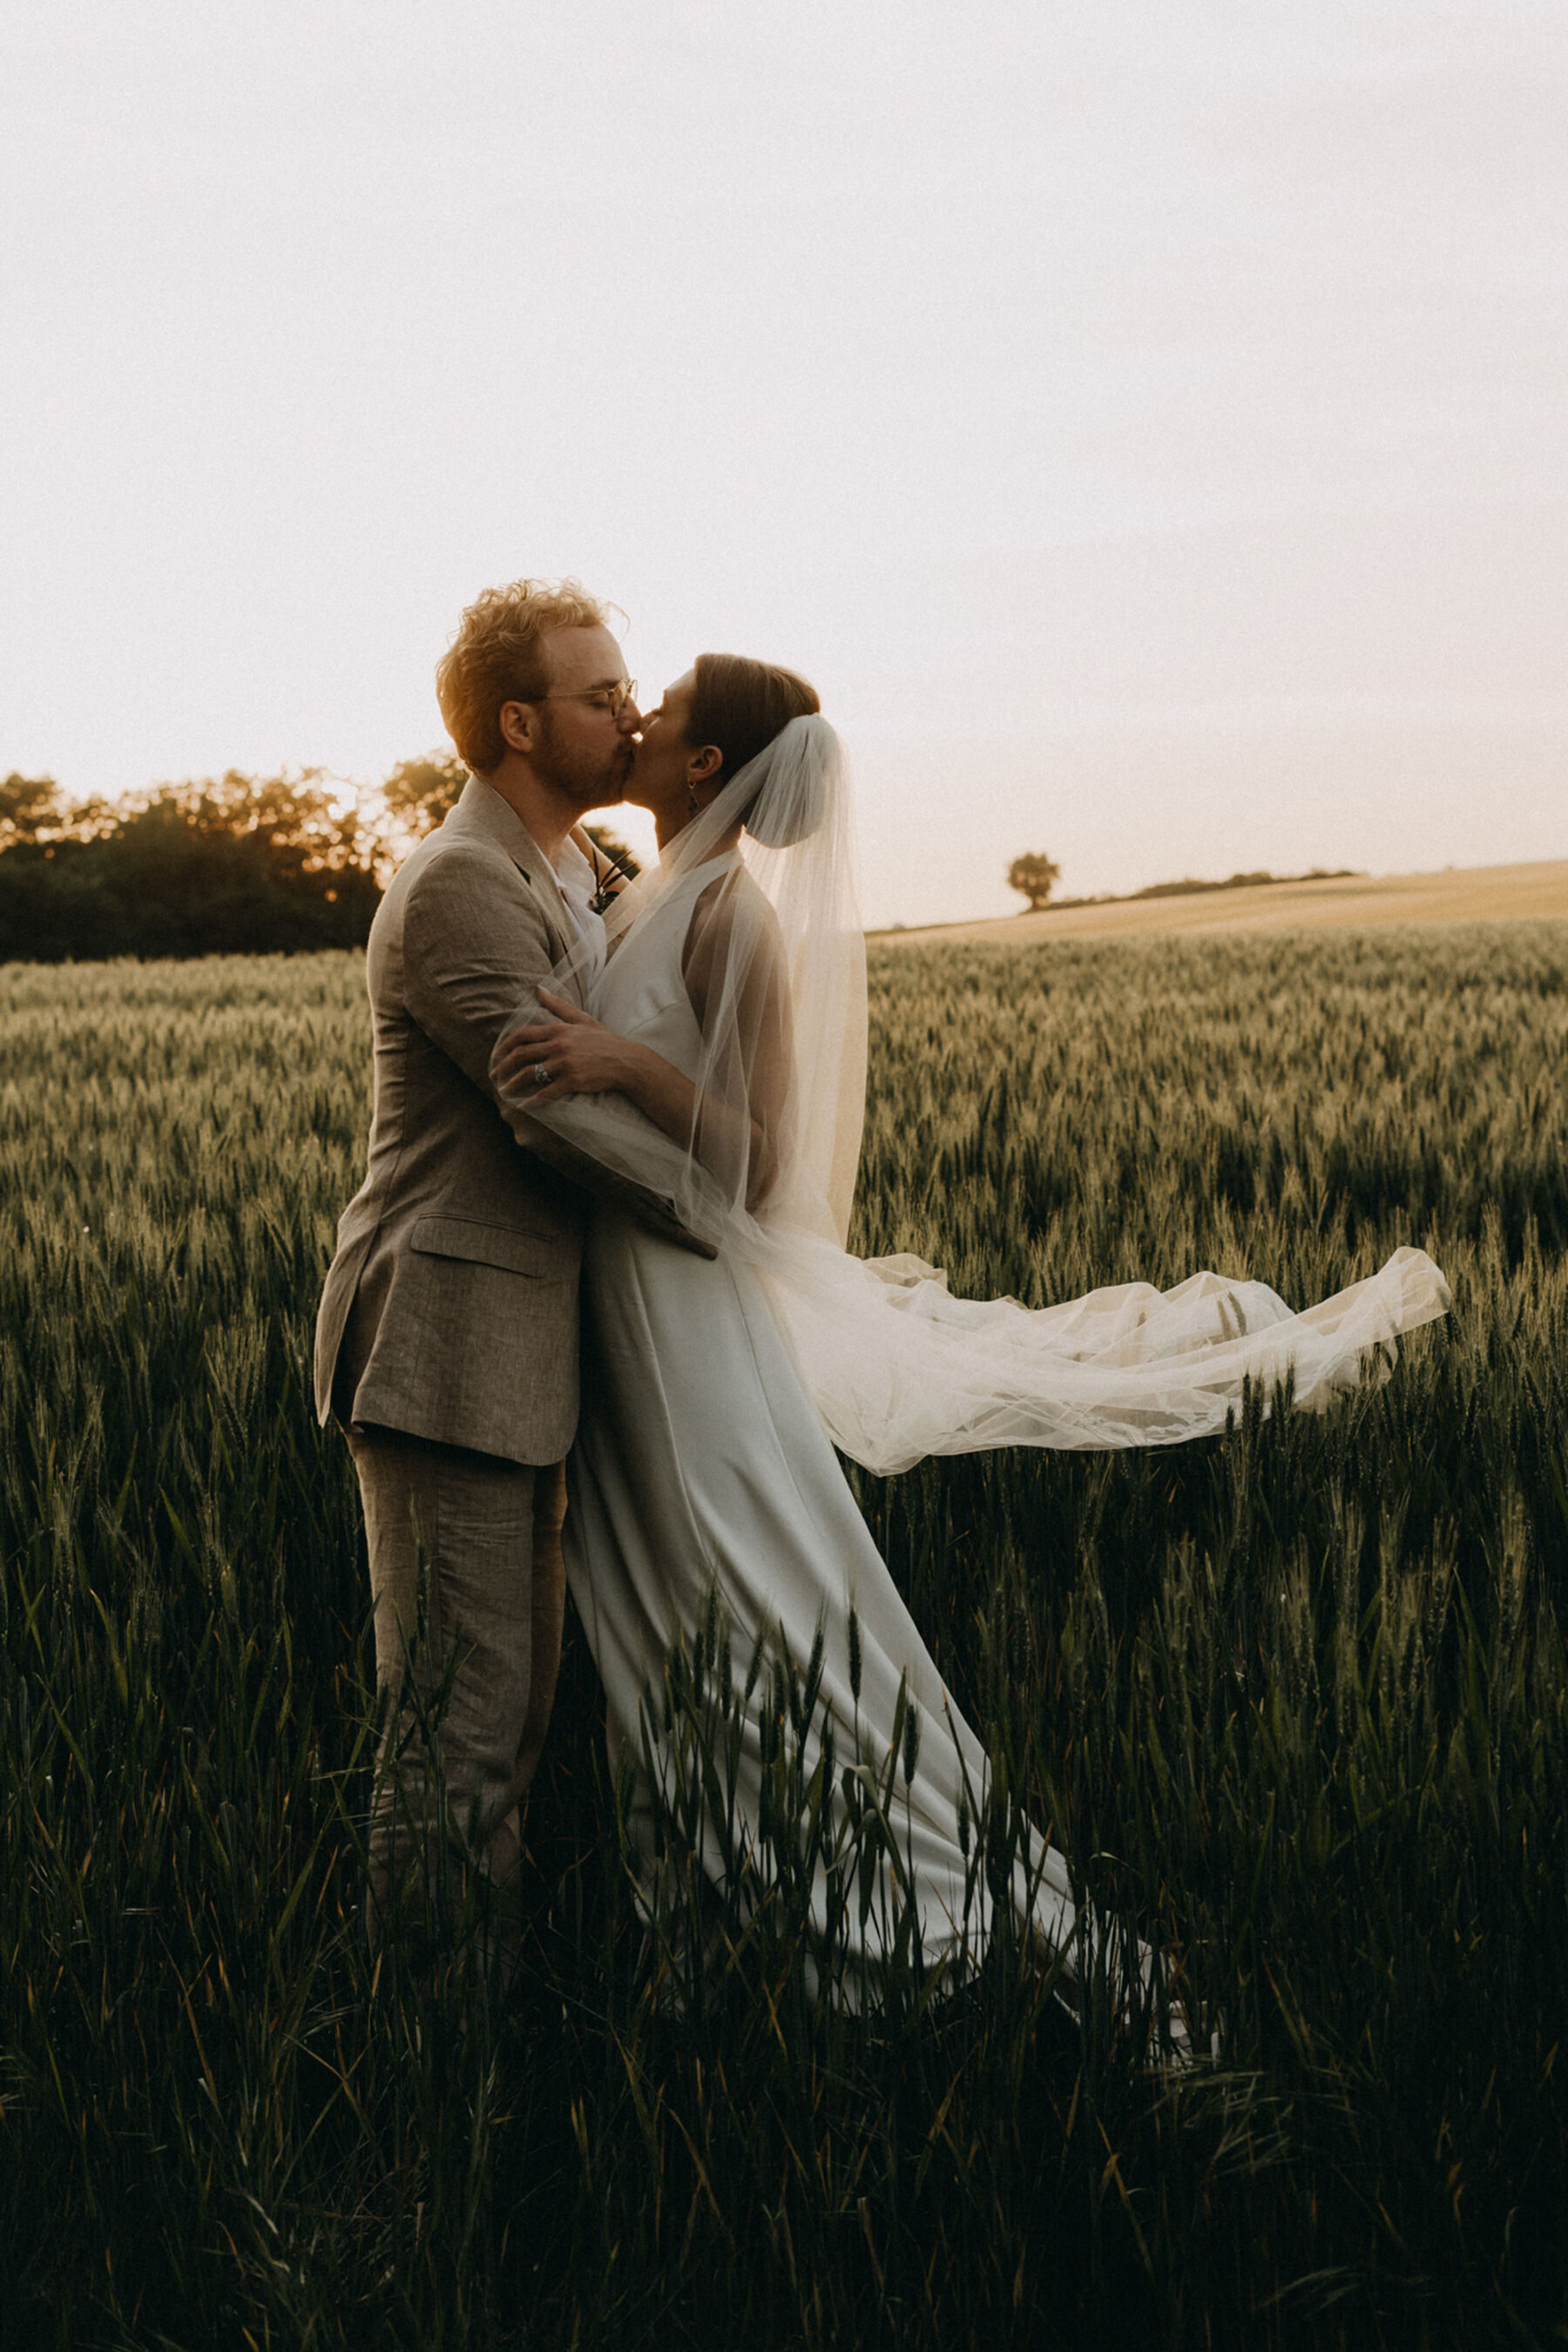 Bride and groom embracing in a cornfield at goldenhour. She wears a halterneck gown.